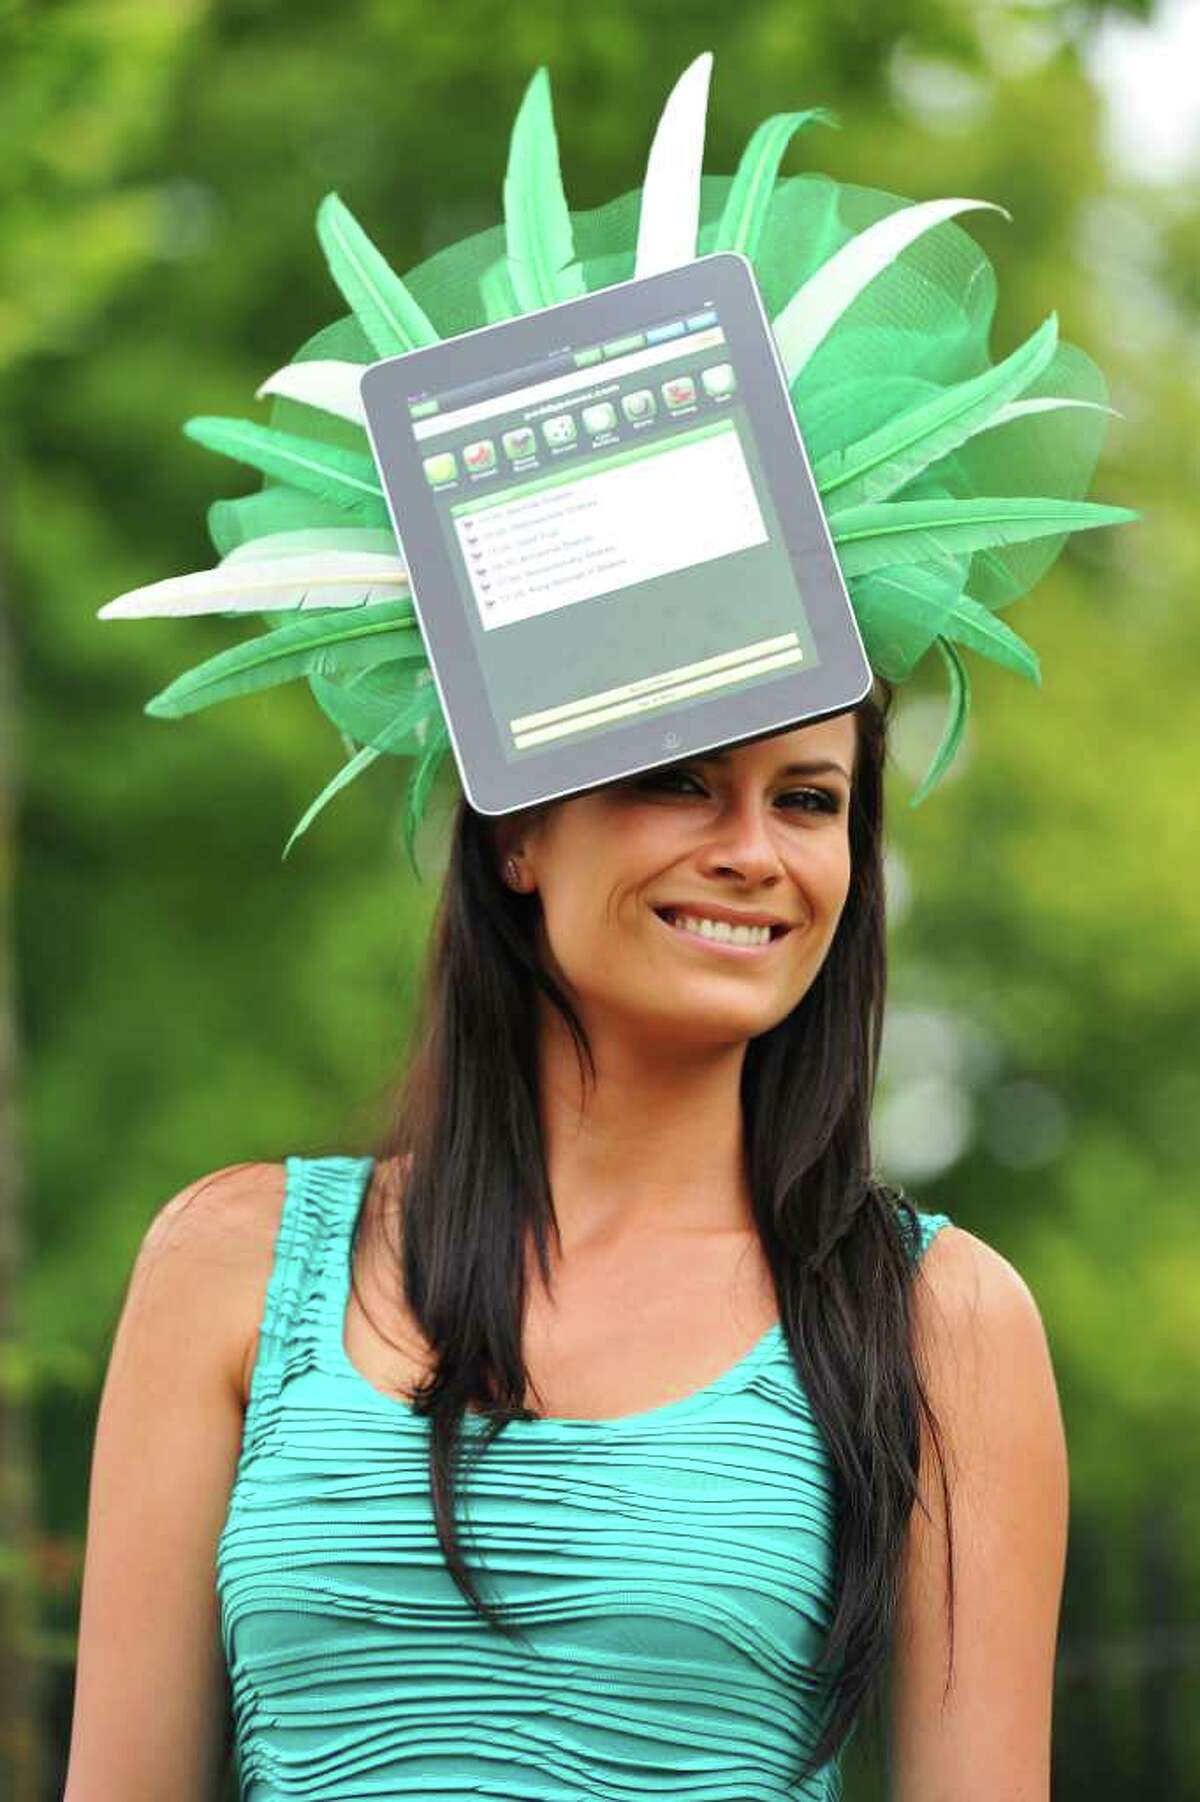 A race-goer wears a hat with an iPad design on the second day of the annual Royal Ascot horse racing event near Windsor, west of London, in Berkshire, on Wednesday. The five-day meeting is one of the highlights of the global horse racing calendar. Horse racing has been held at the famous Berkshire course since 1711 and tradition is a hallmark of the meeting. Top hats and tails remain compulsory in parts of the course while a daily procession of horse-drawn carriages brings the Queen to the course. AFP PHOTO/Carl de Souza